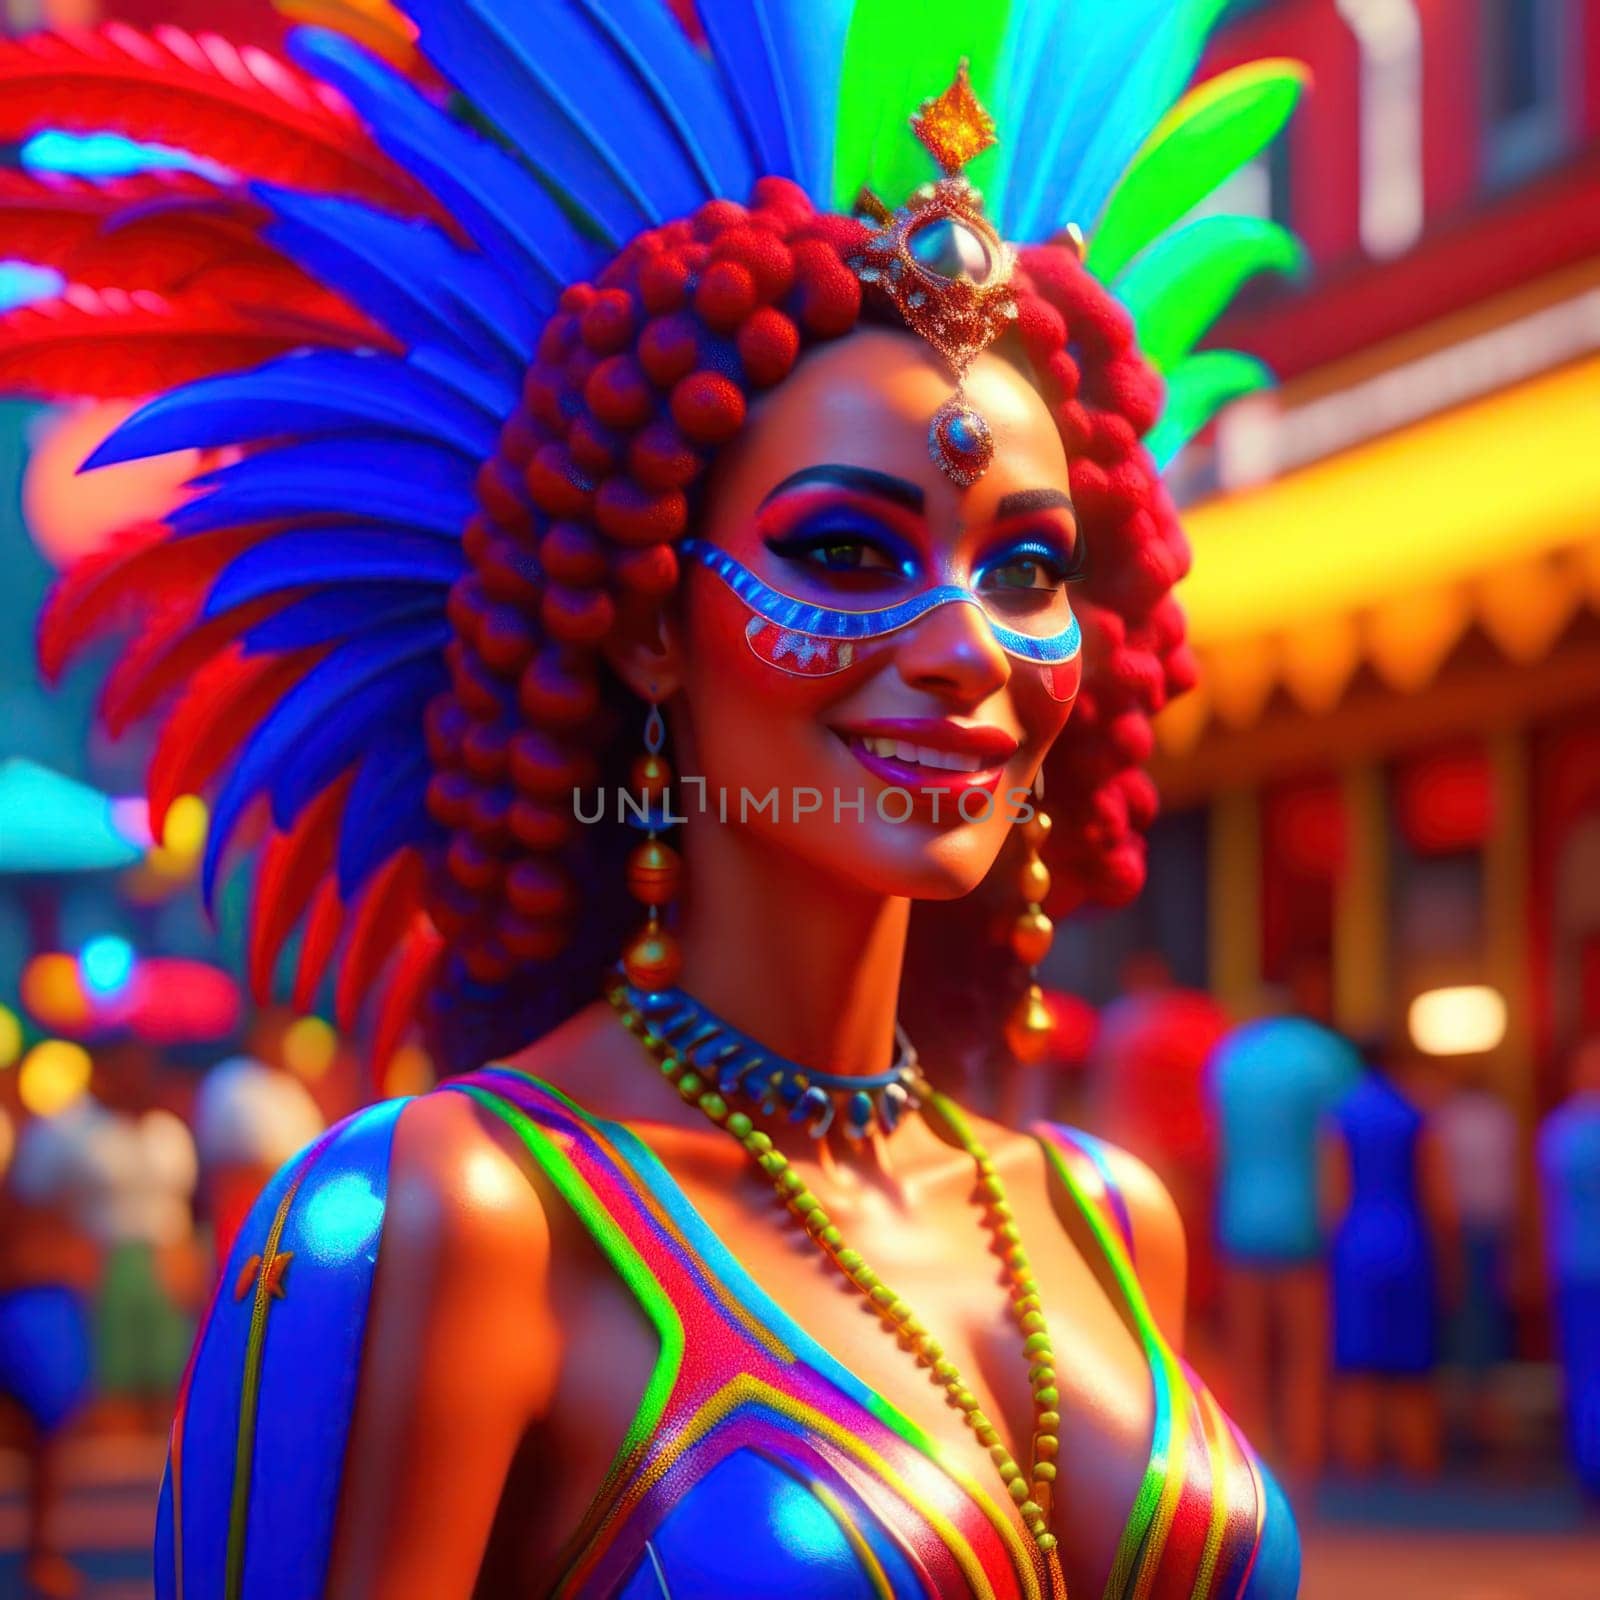 Girl at the carnival. Image created by AI